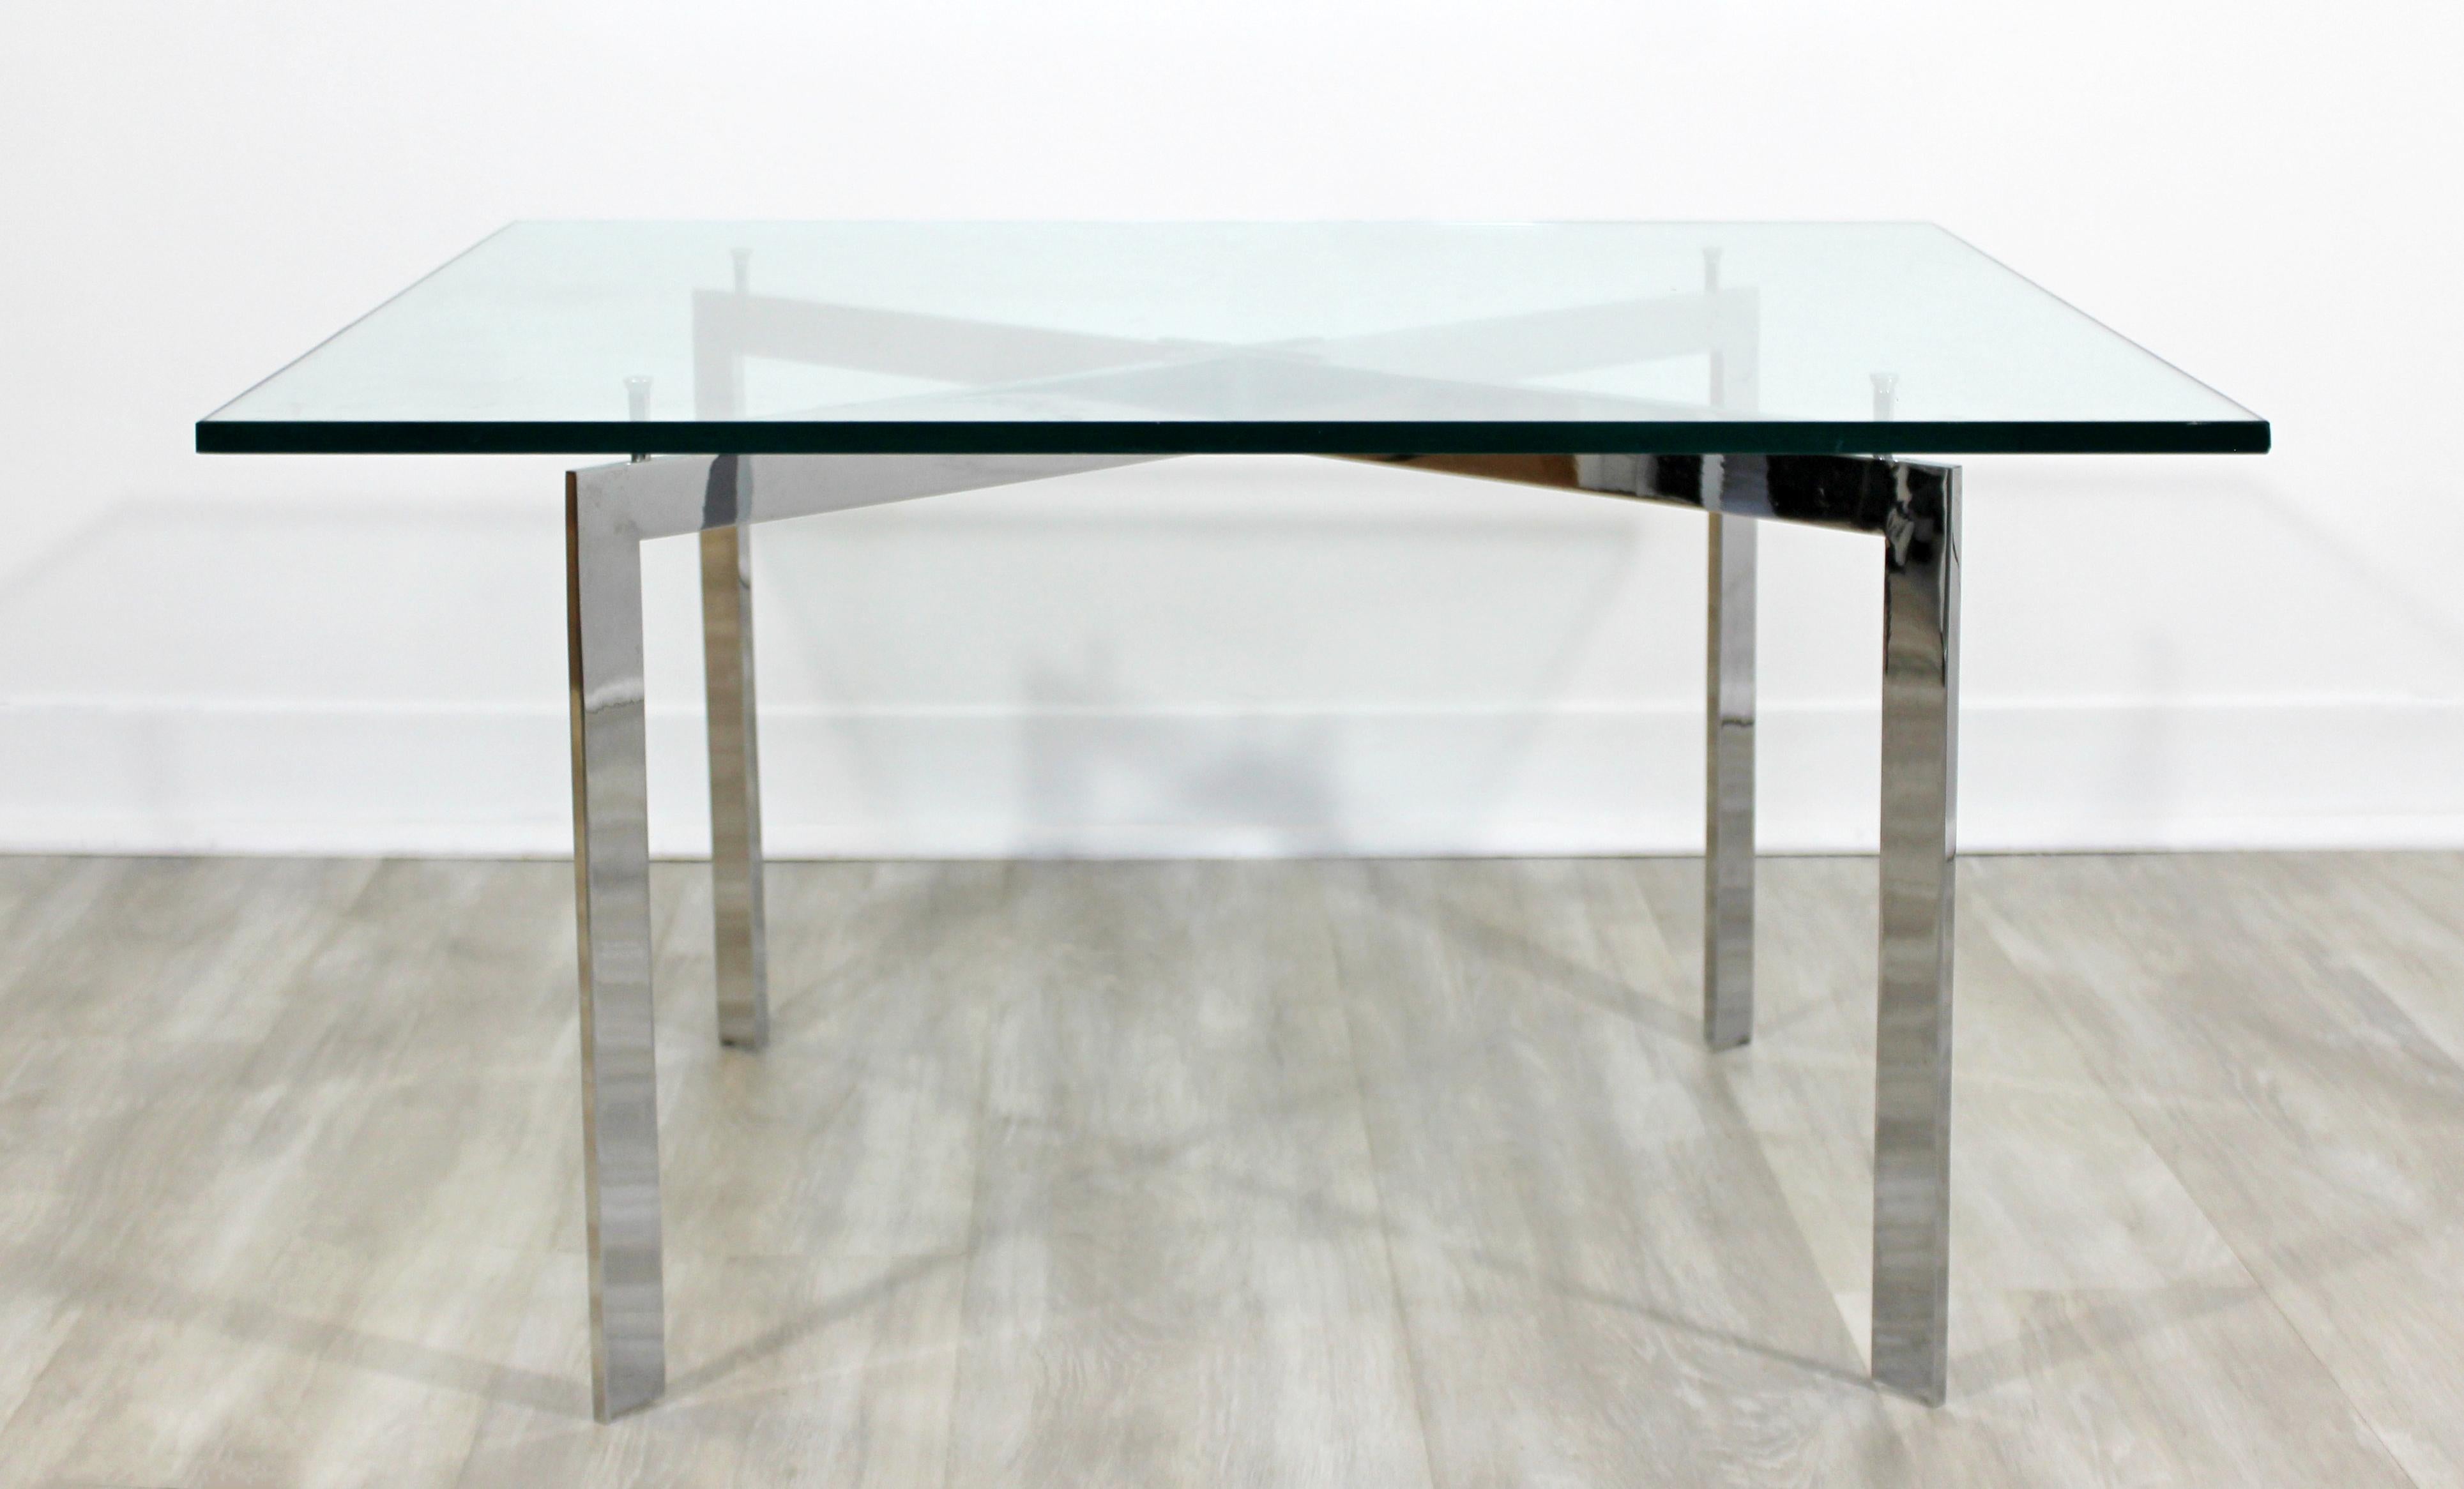 For your consideration is a wonderful, square coffee table, made of chrome and with a glass top, by Ward Bennett for Geiger Furniture, circa 1970s. In very good vintage condition. The dimensions are 30